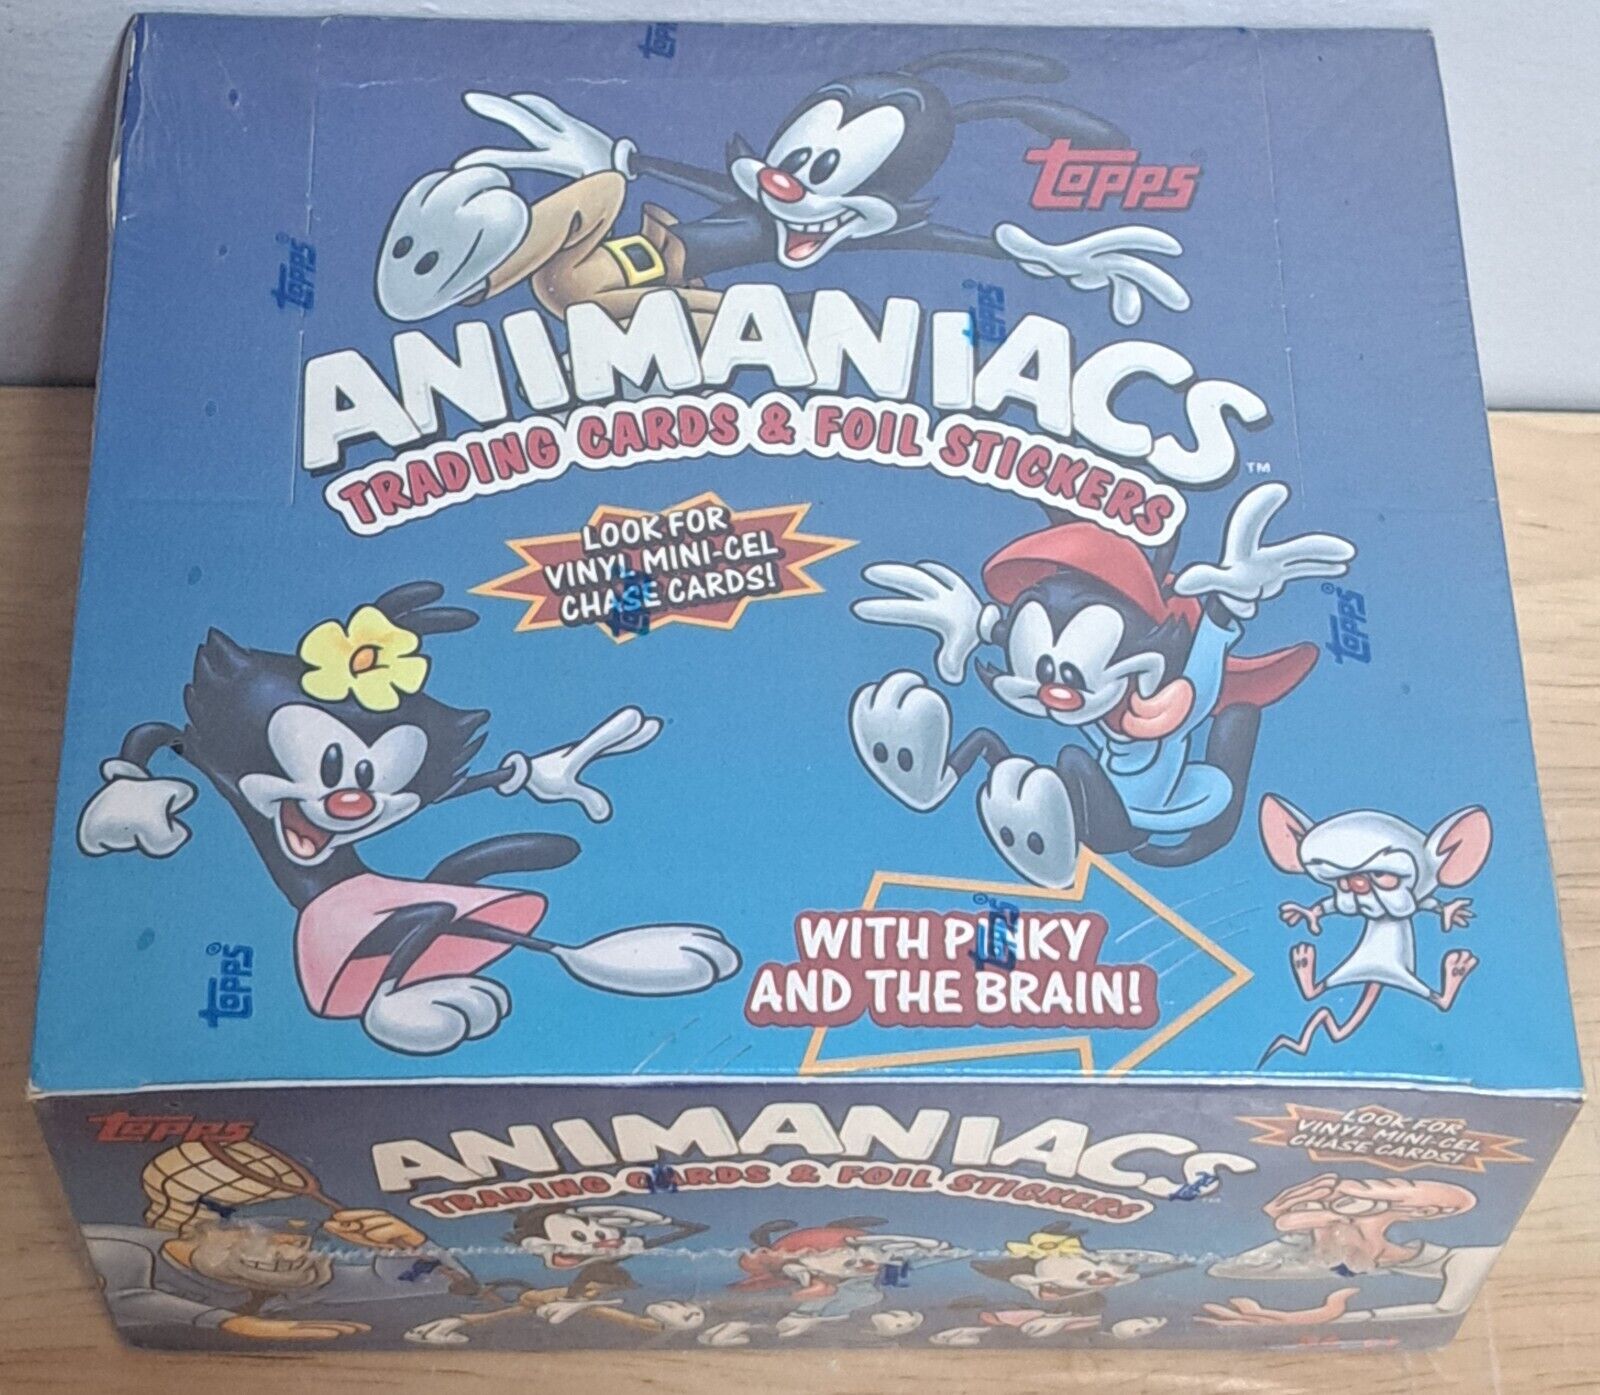 1995 TOPPS ANIMANIACS TRADING CARD BOX FACTORY SEALED